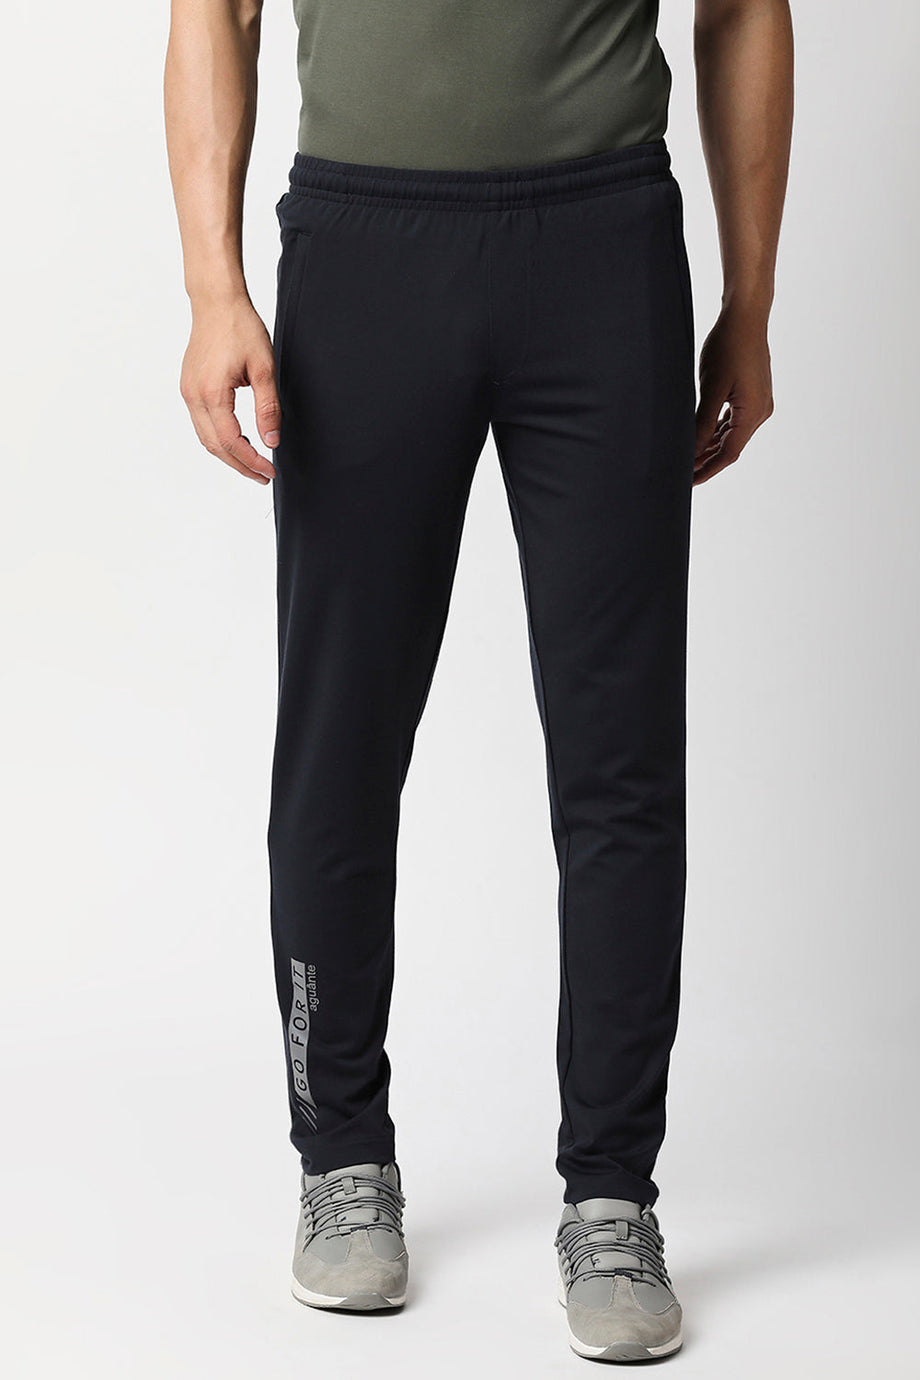 Buy reebok track pants for women in India @ Limeroad